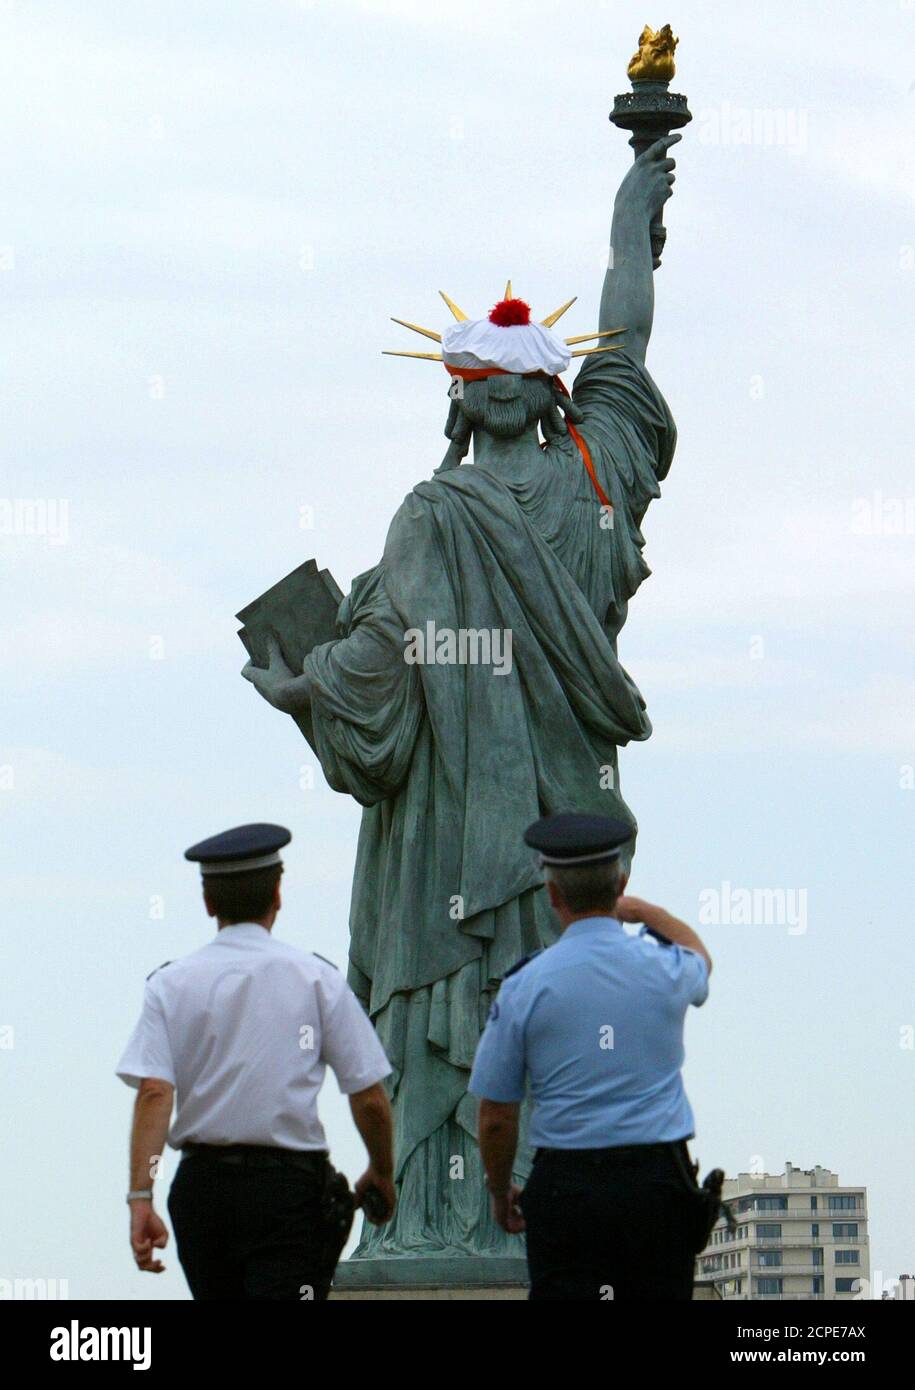 French police look up at a French navy sailor's bonnet which rests on the  head of the replica of the Statue of Liberty located on a narrow island in  the River Seine